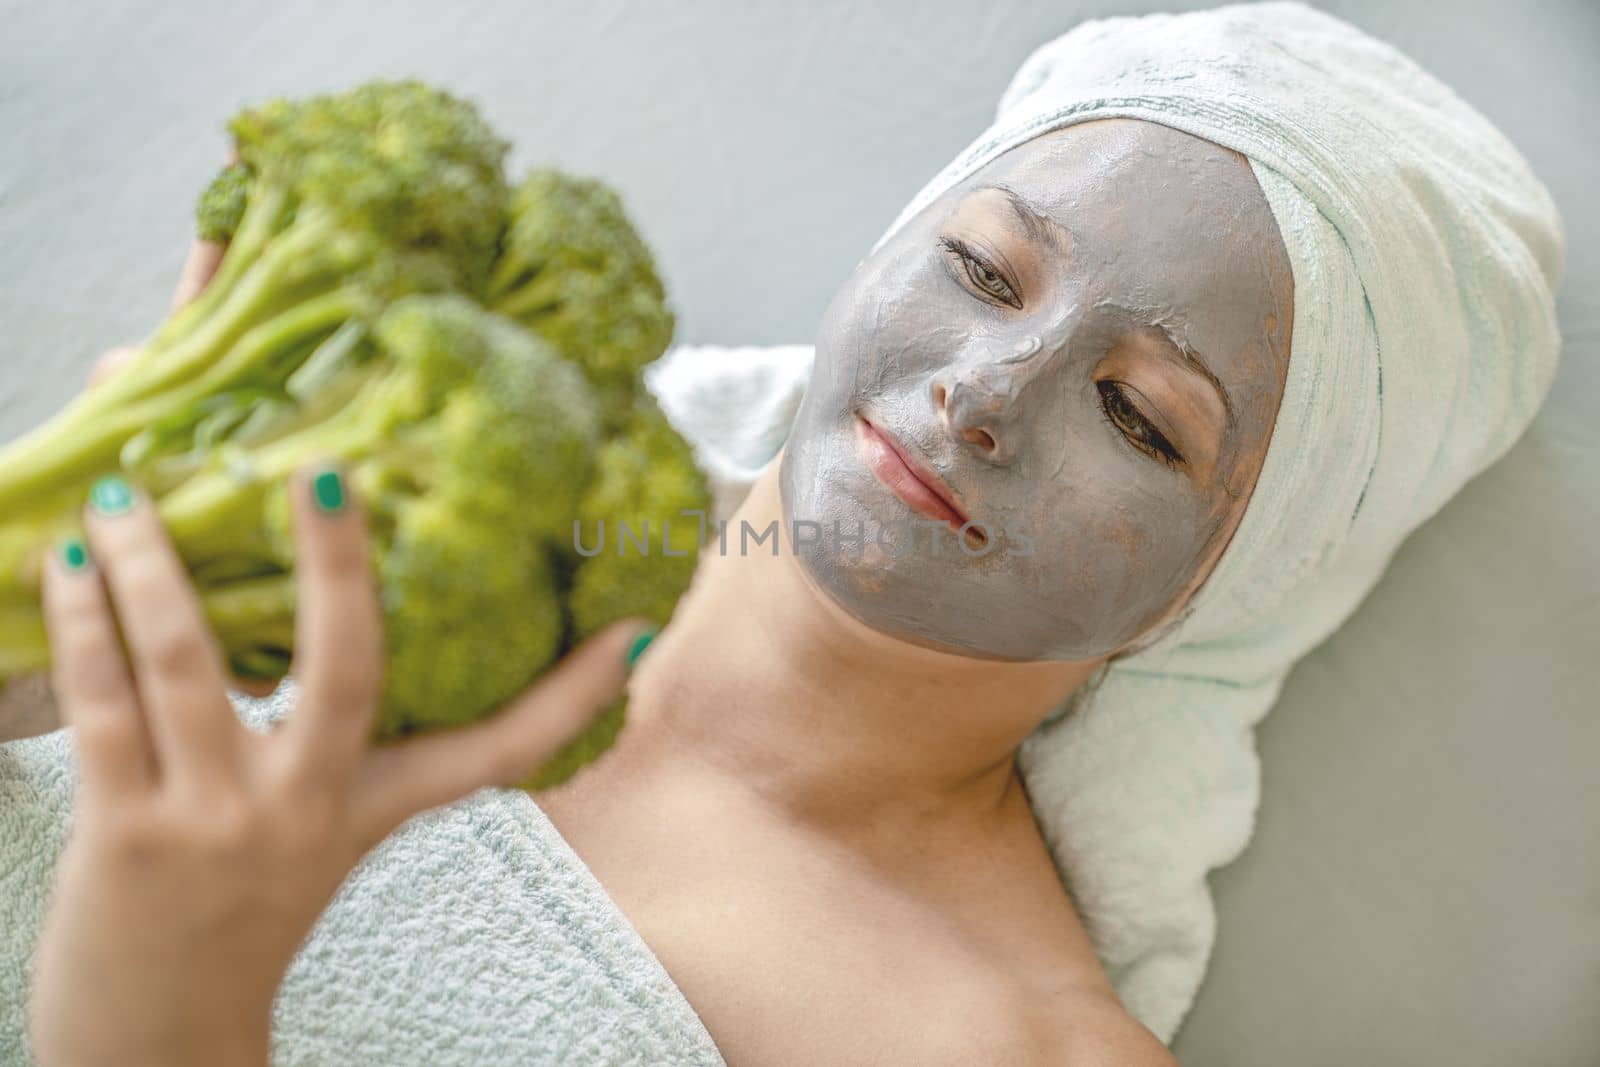 Concept of natural facial skin care. Funny young woman with cosmetic mask made of gray clay, her hair and body wrapped in towels, she holds broccoli in her hands, portrait, close-up. Spa procedure.